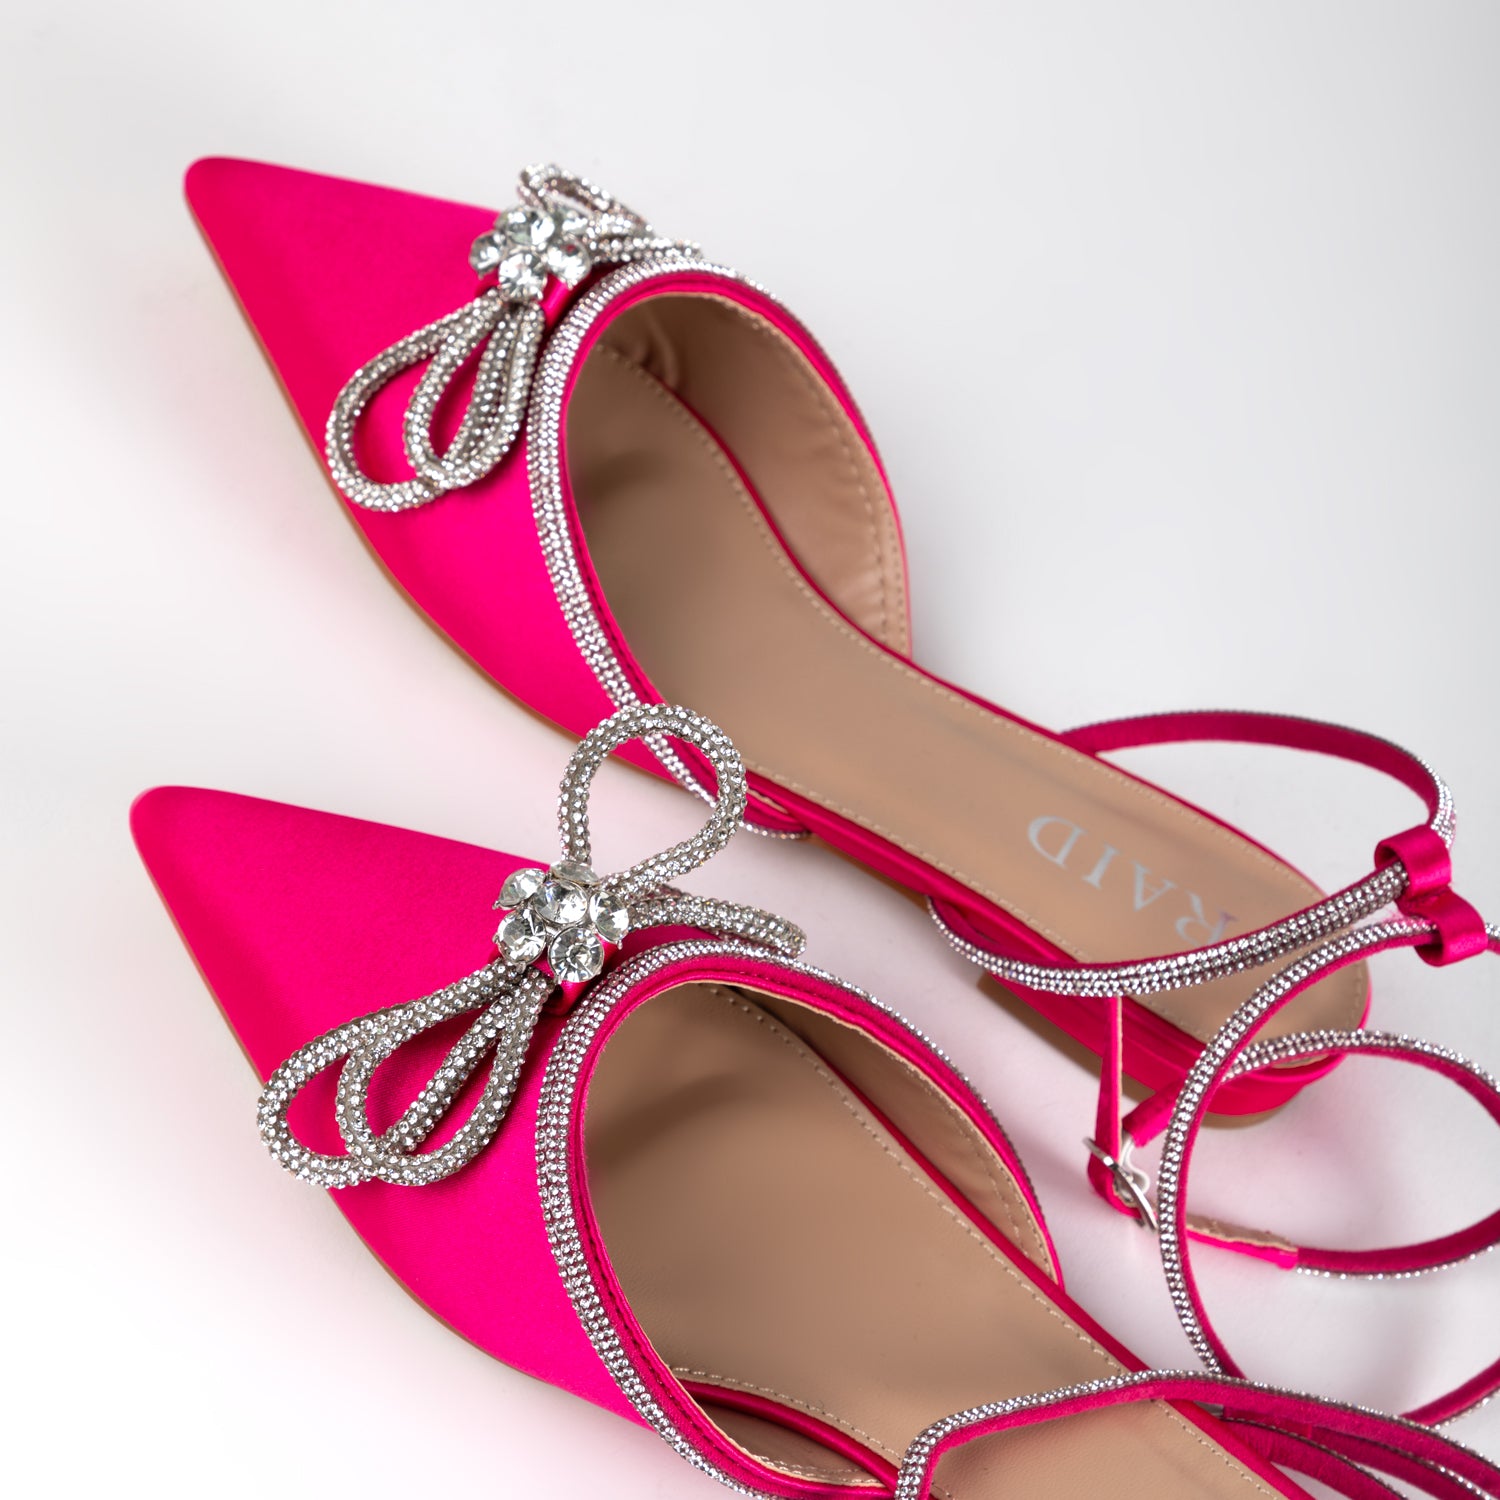 RAID Armell Flat Lace up Pump in Hot Pink Satin